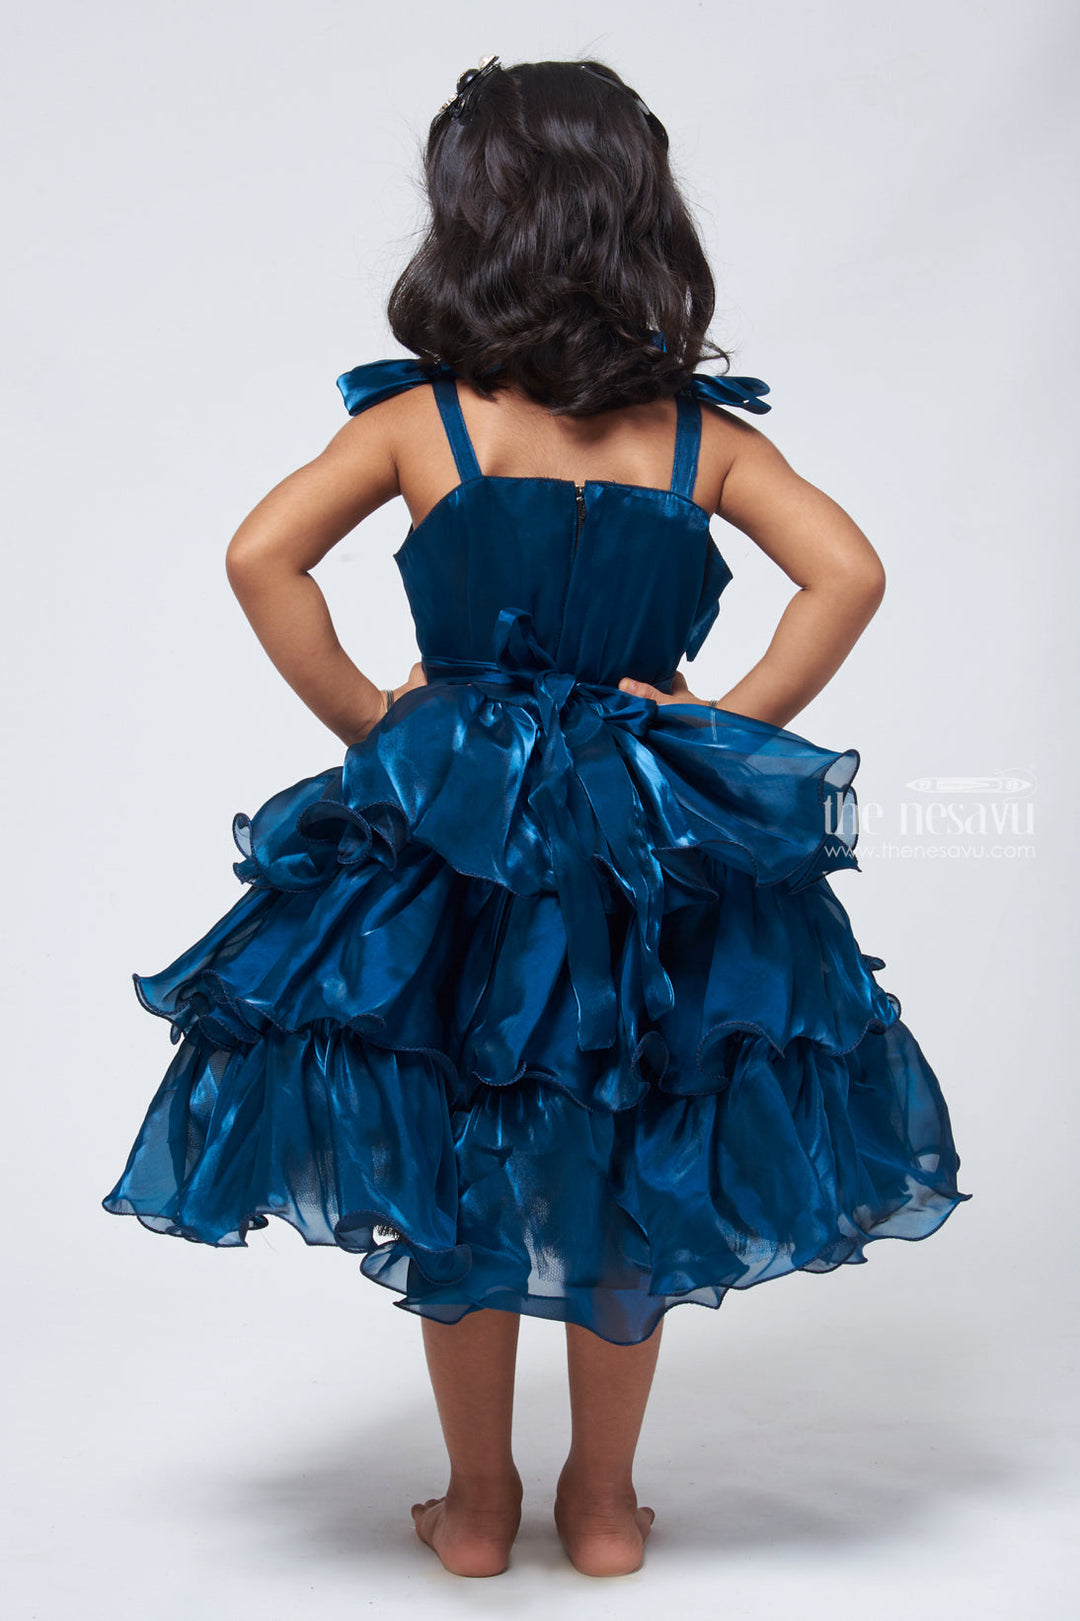 The Nesavu Party Frock Stunning Blue Ruffled Layered Frock: Party Dress with Stone Detailing on Yoke for Girls Nesavu Stone worked party frock for Girls | Premium Wear | The Nesavu